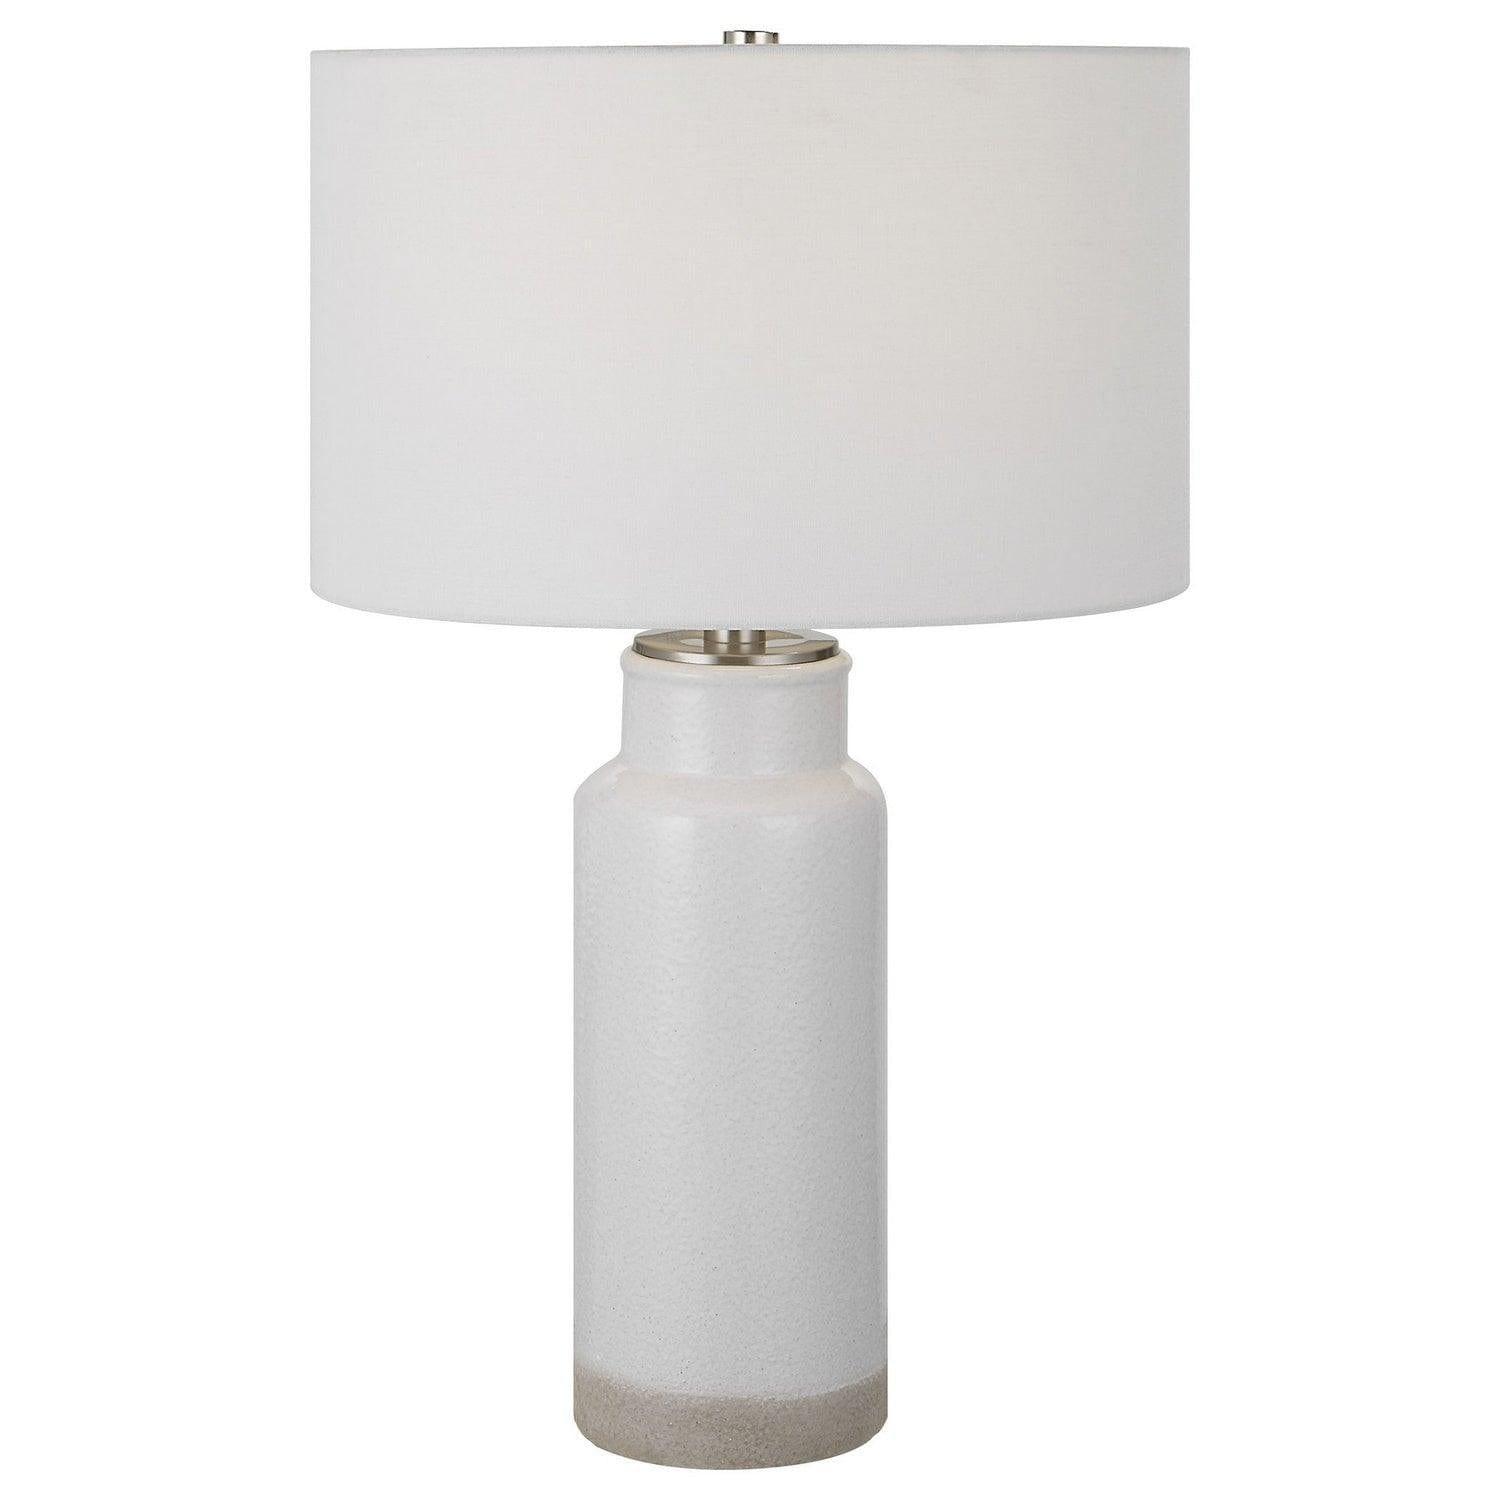 The Uttermost - Albany Table Lamp - 30038 | Montreal Lighting & Hardware